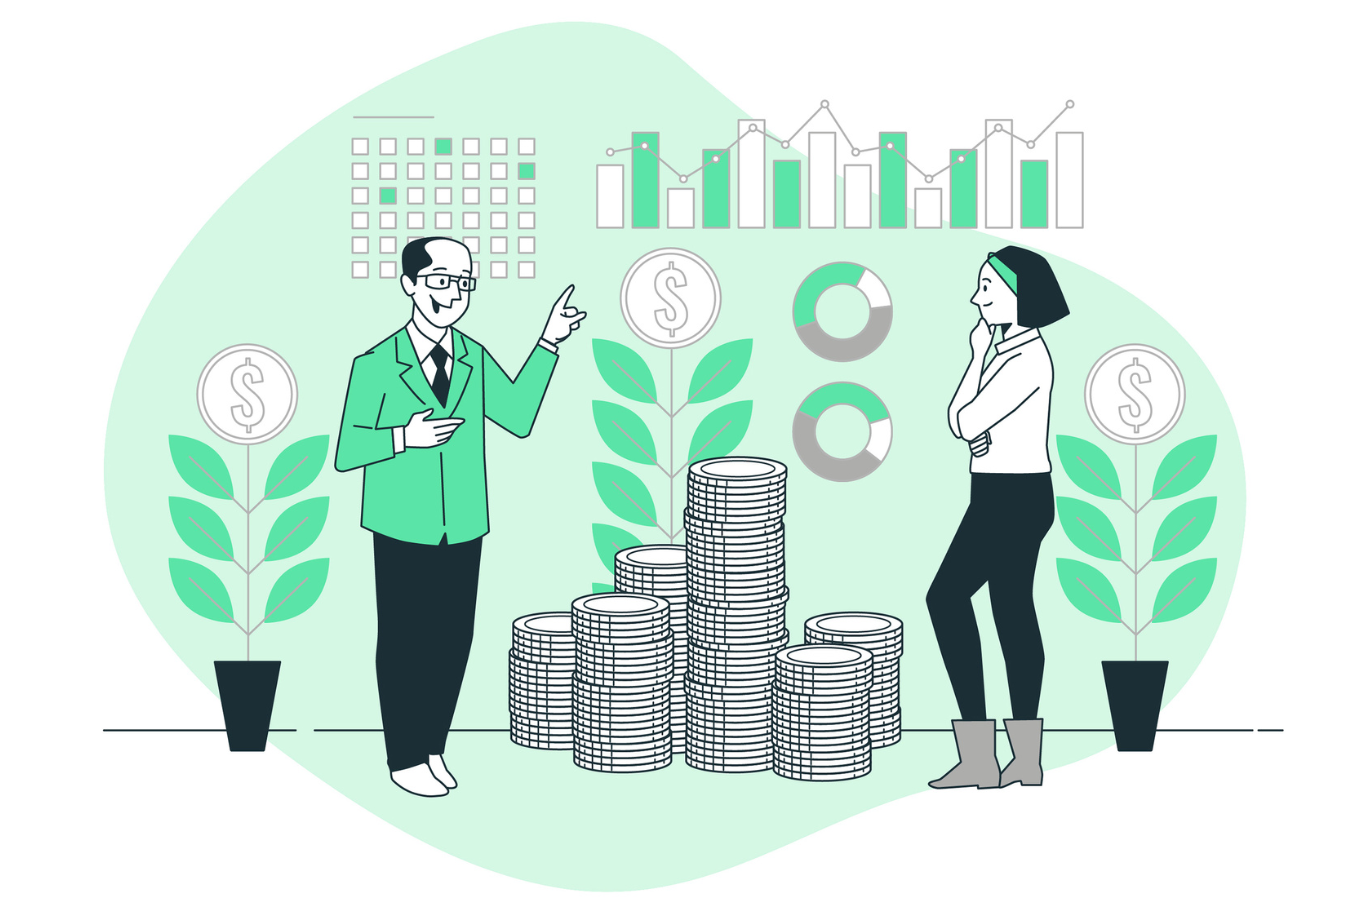 Two business people stand near stacks of coins, bar charts, and plants with dollar signs, discussing financial growth